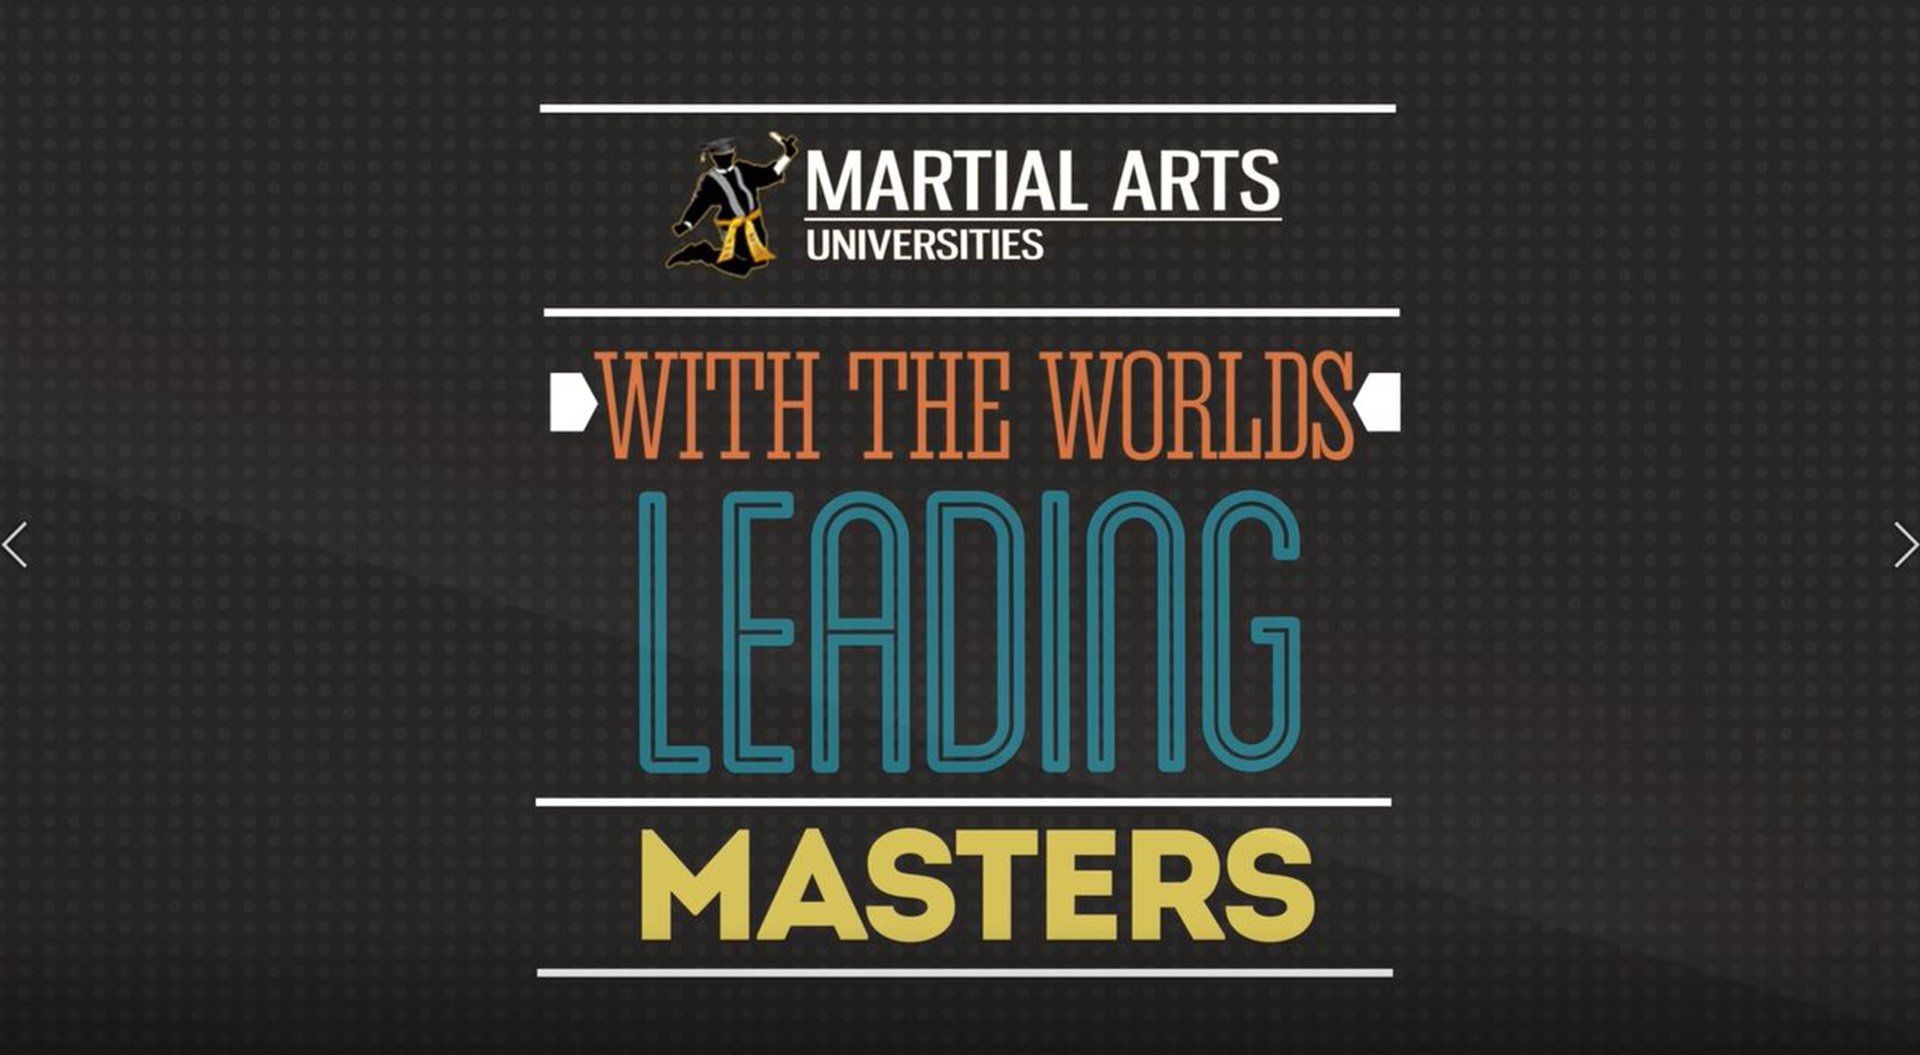 Learn from the worlds leading masters in martial arts